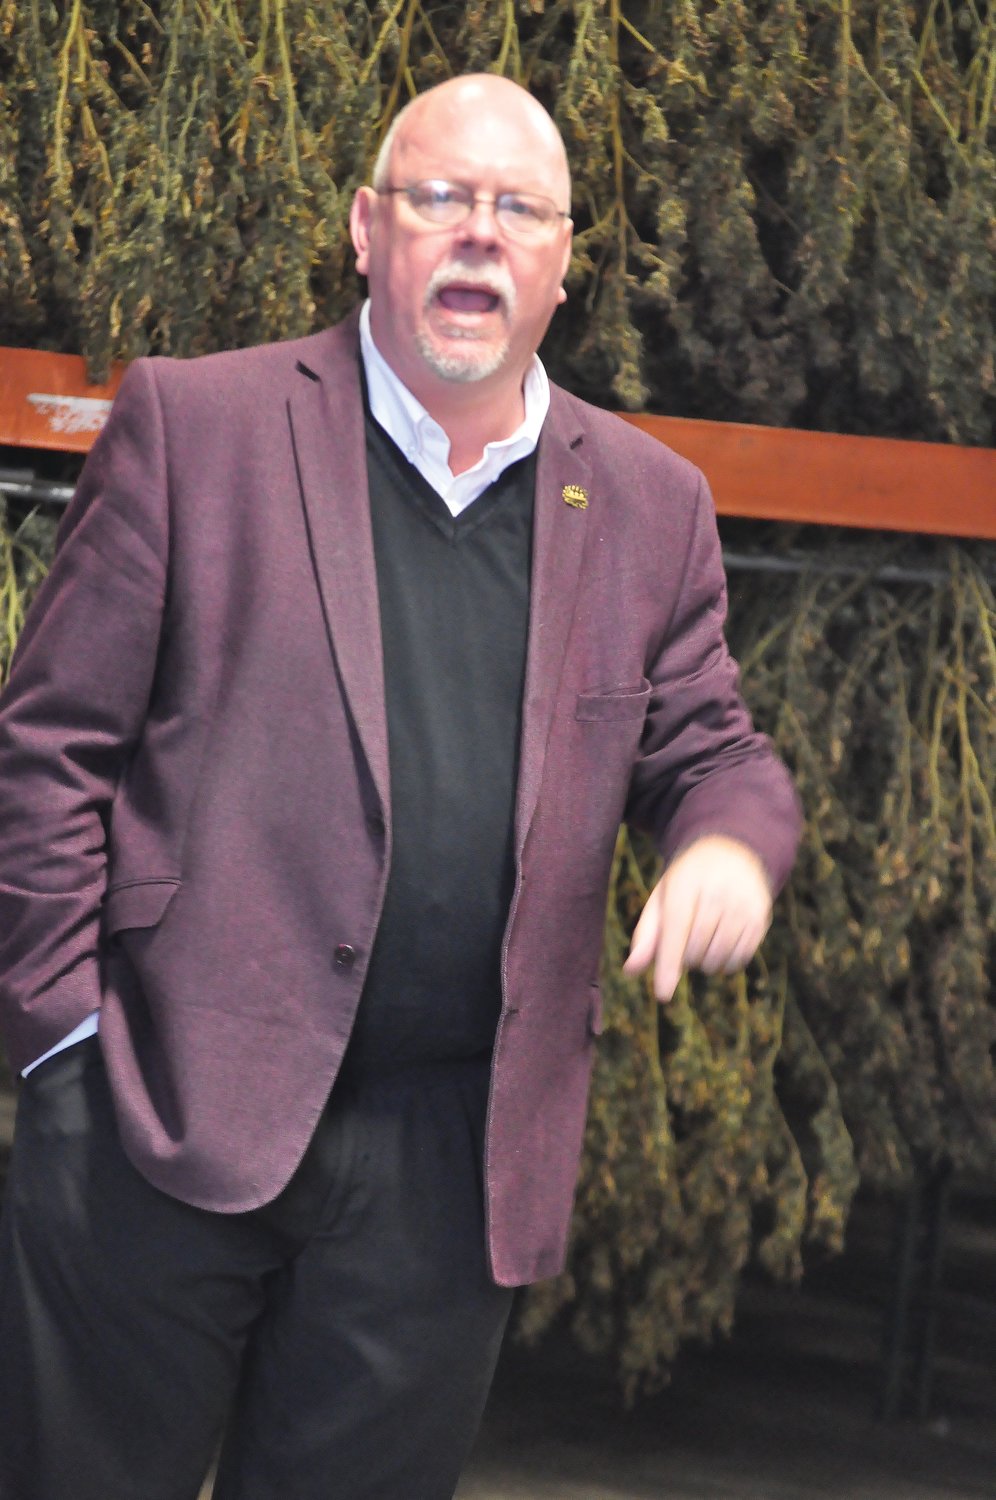 Donald Rainwater speaks Monday at Heritage Farmacy. The Libertarian candidate for Indiana governor called for the legalization of medical and recreational cannabis during an appearance at the local hemp farm.